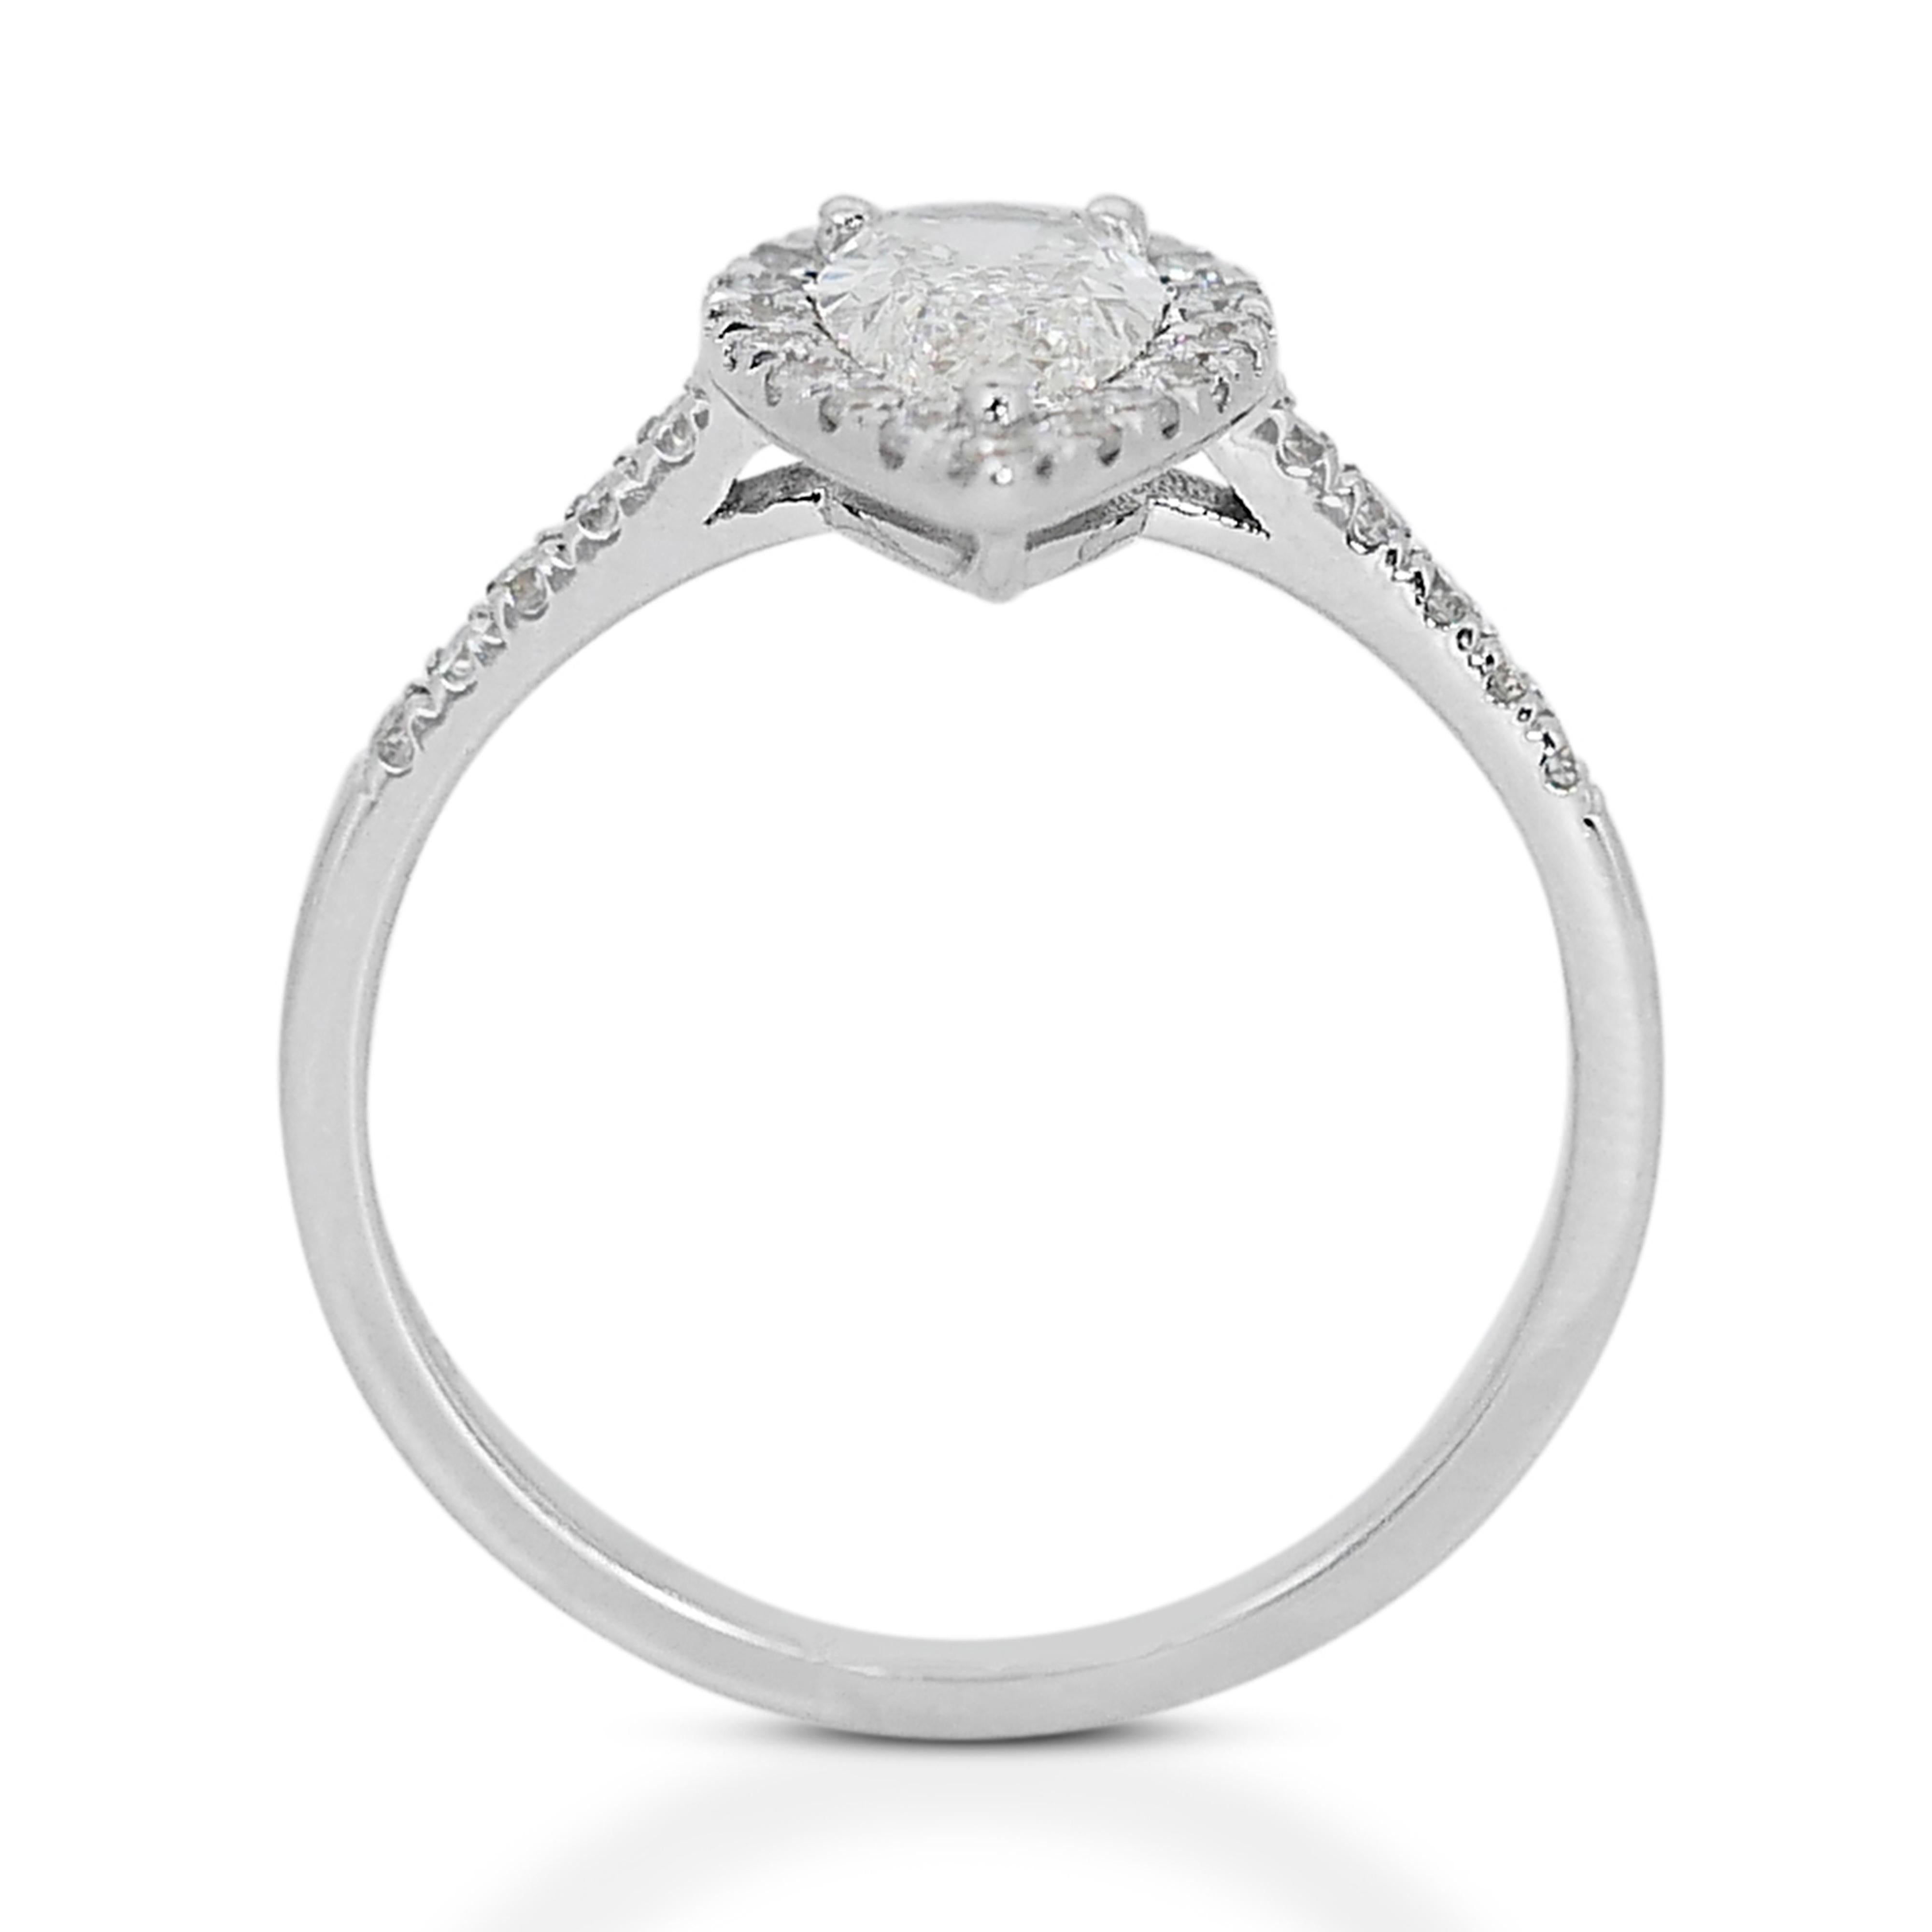 Stunning 1.97ct Pear-Shaped Diamond Halo Ring in 18k White Gold - GIA Certified For Sale 2